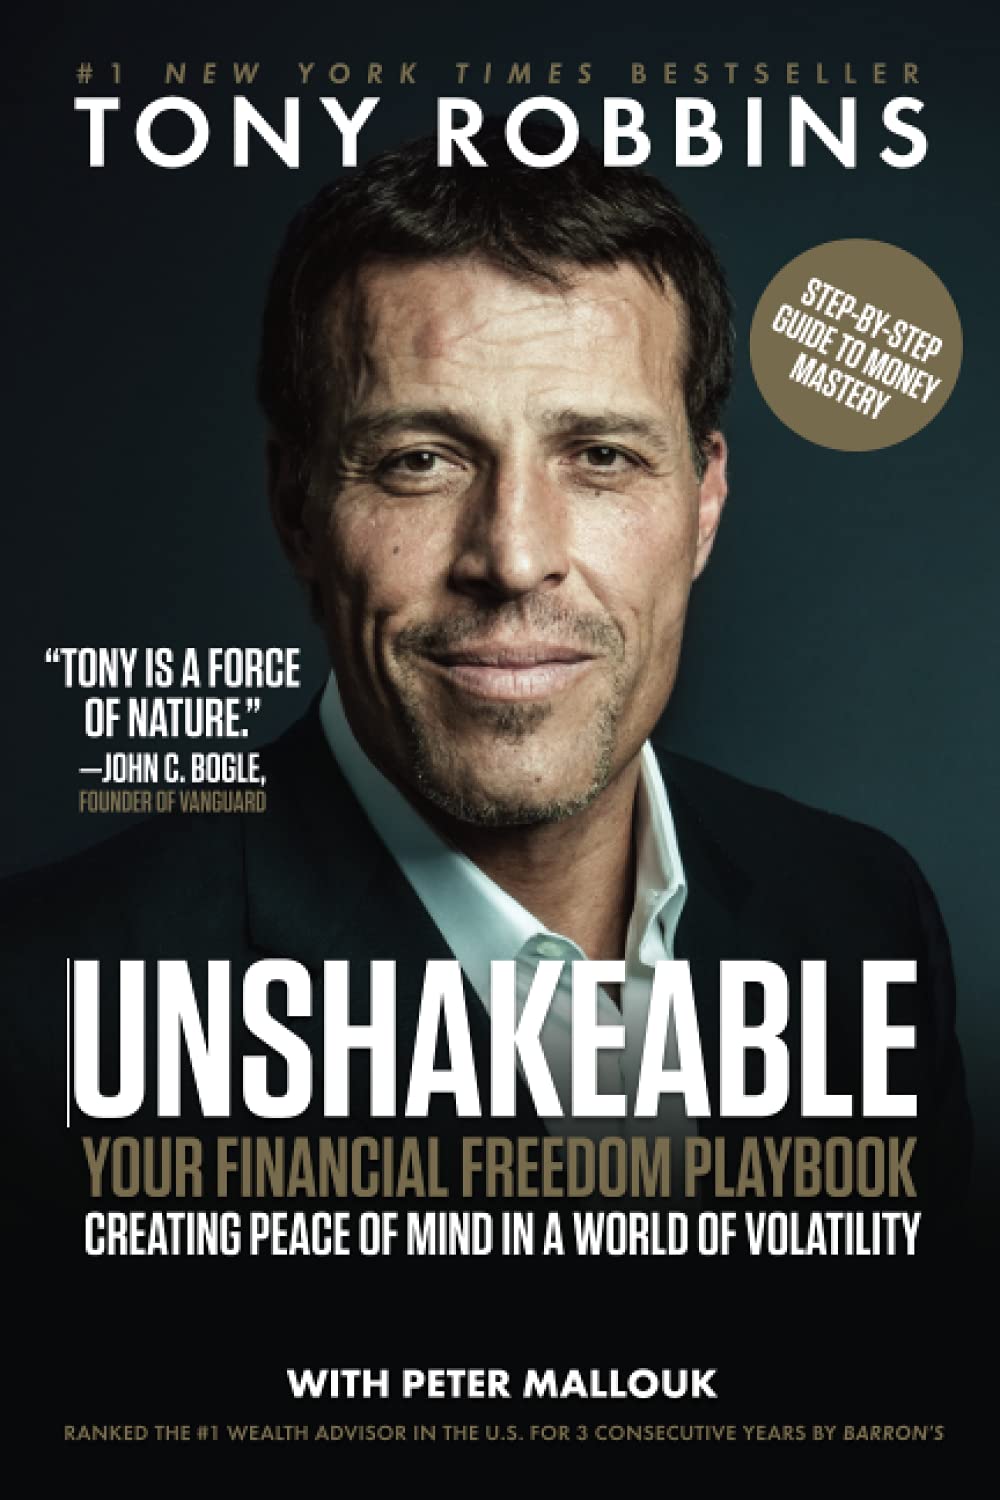 Unshakeable: Your Financial Freedom Playbook Paperback by Tony Robbins  (Author), Peter Mallouk (Author)